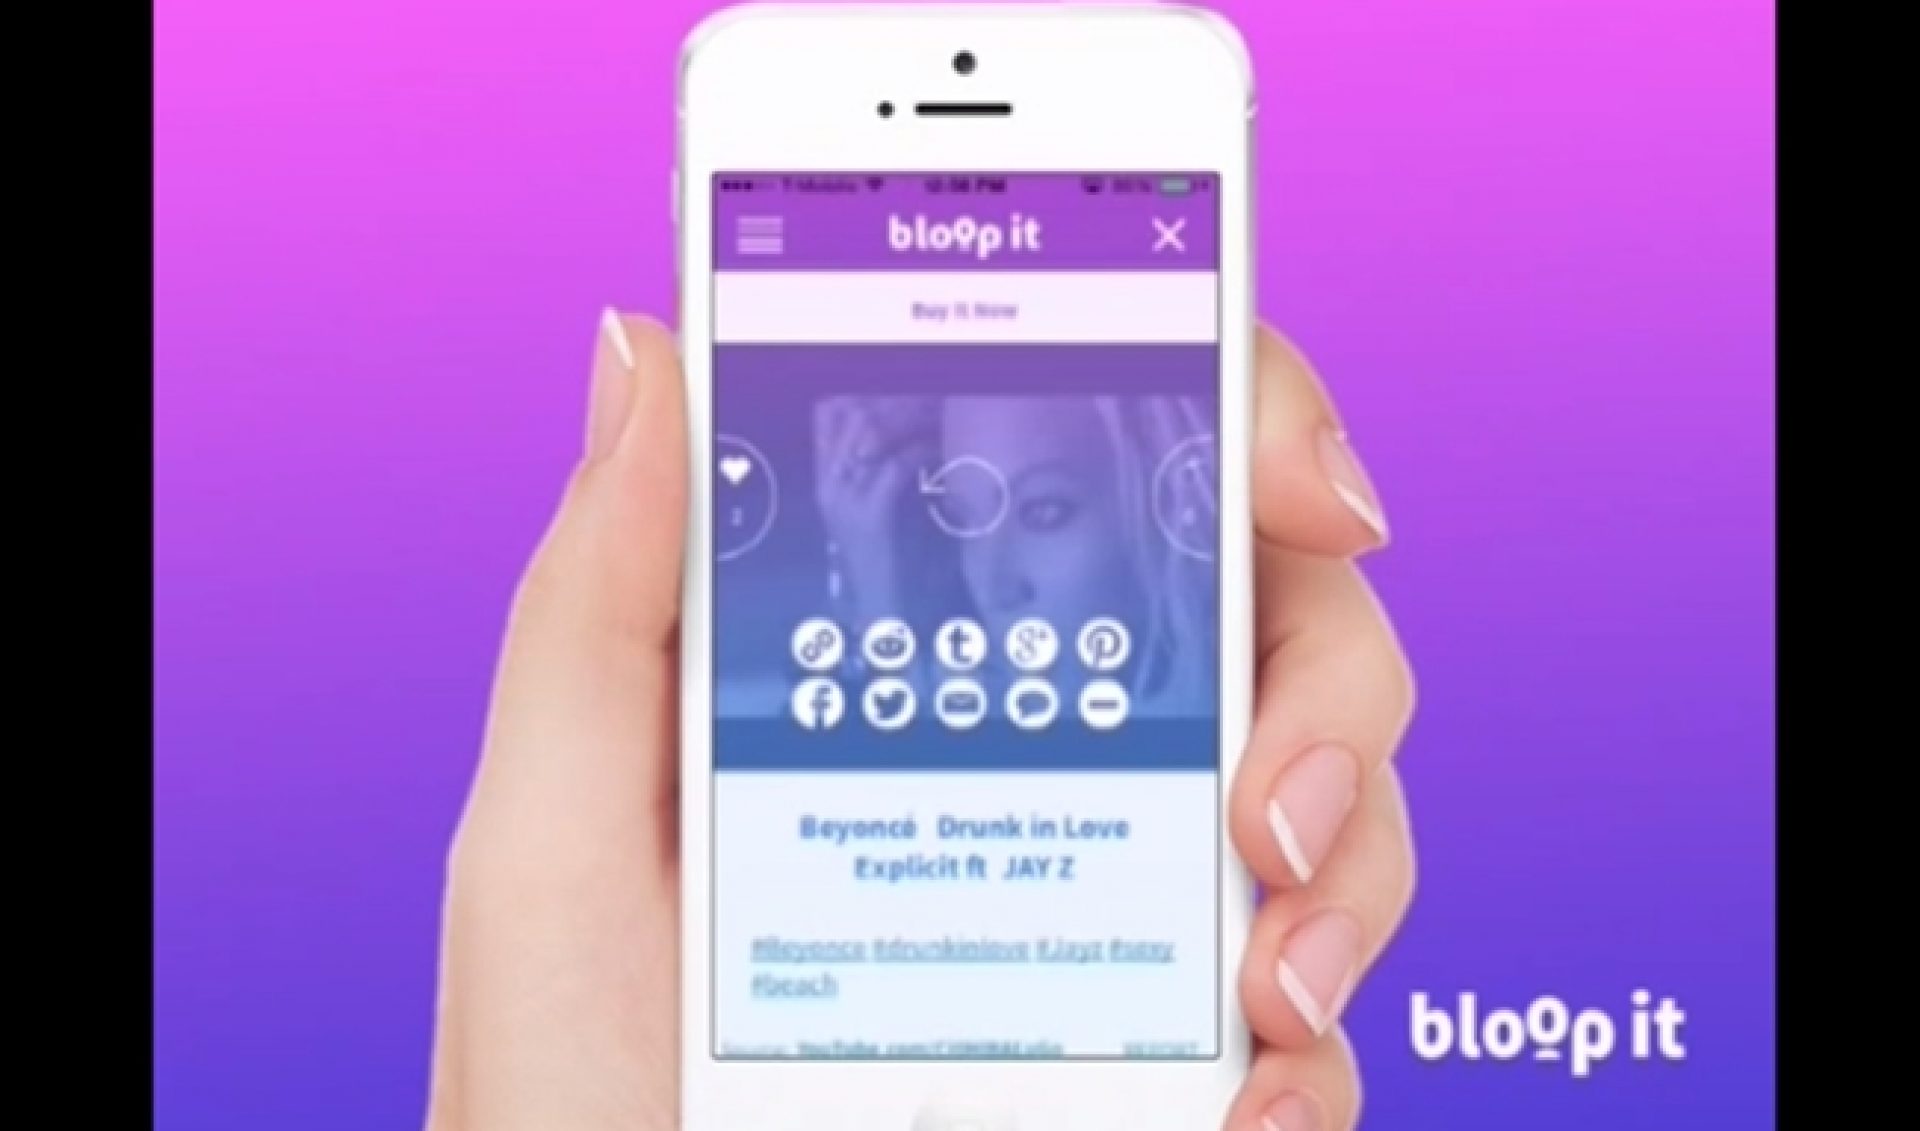 Bloop It Is An App That Cuts YouTube Videos Down To Size